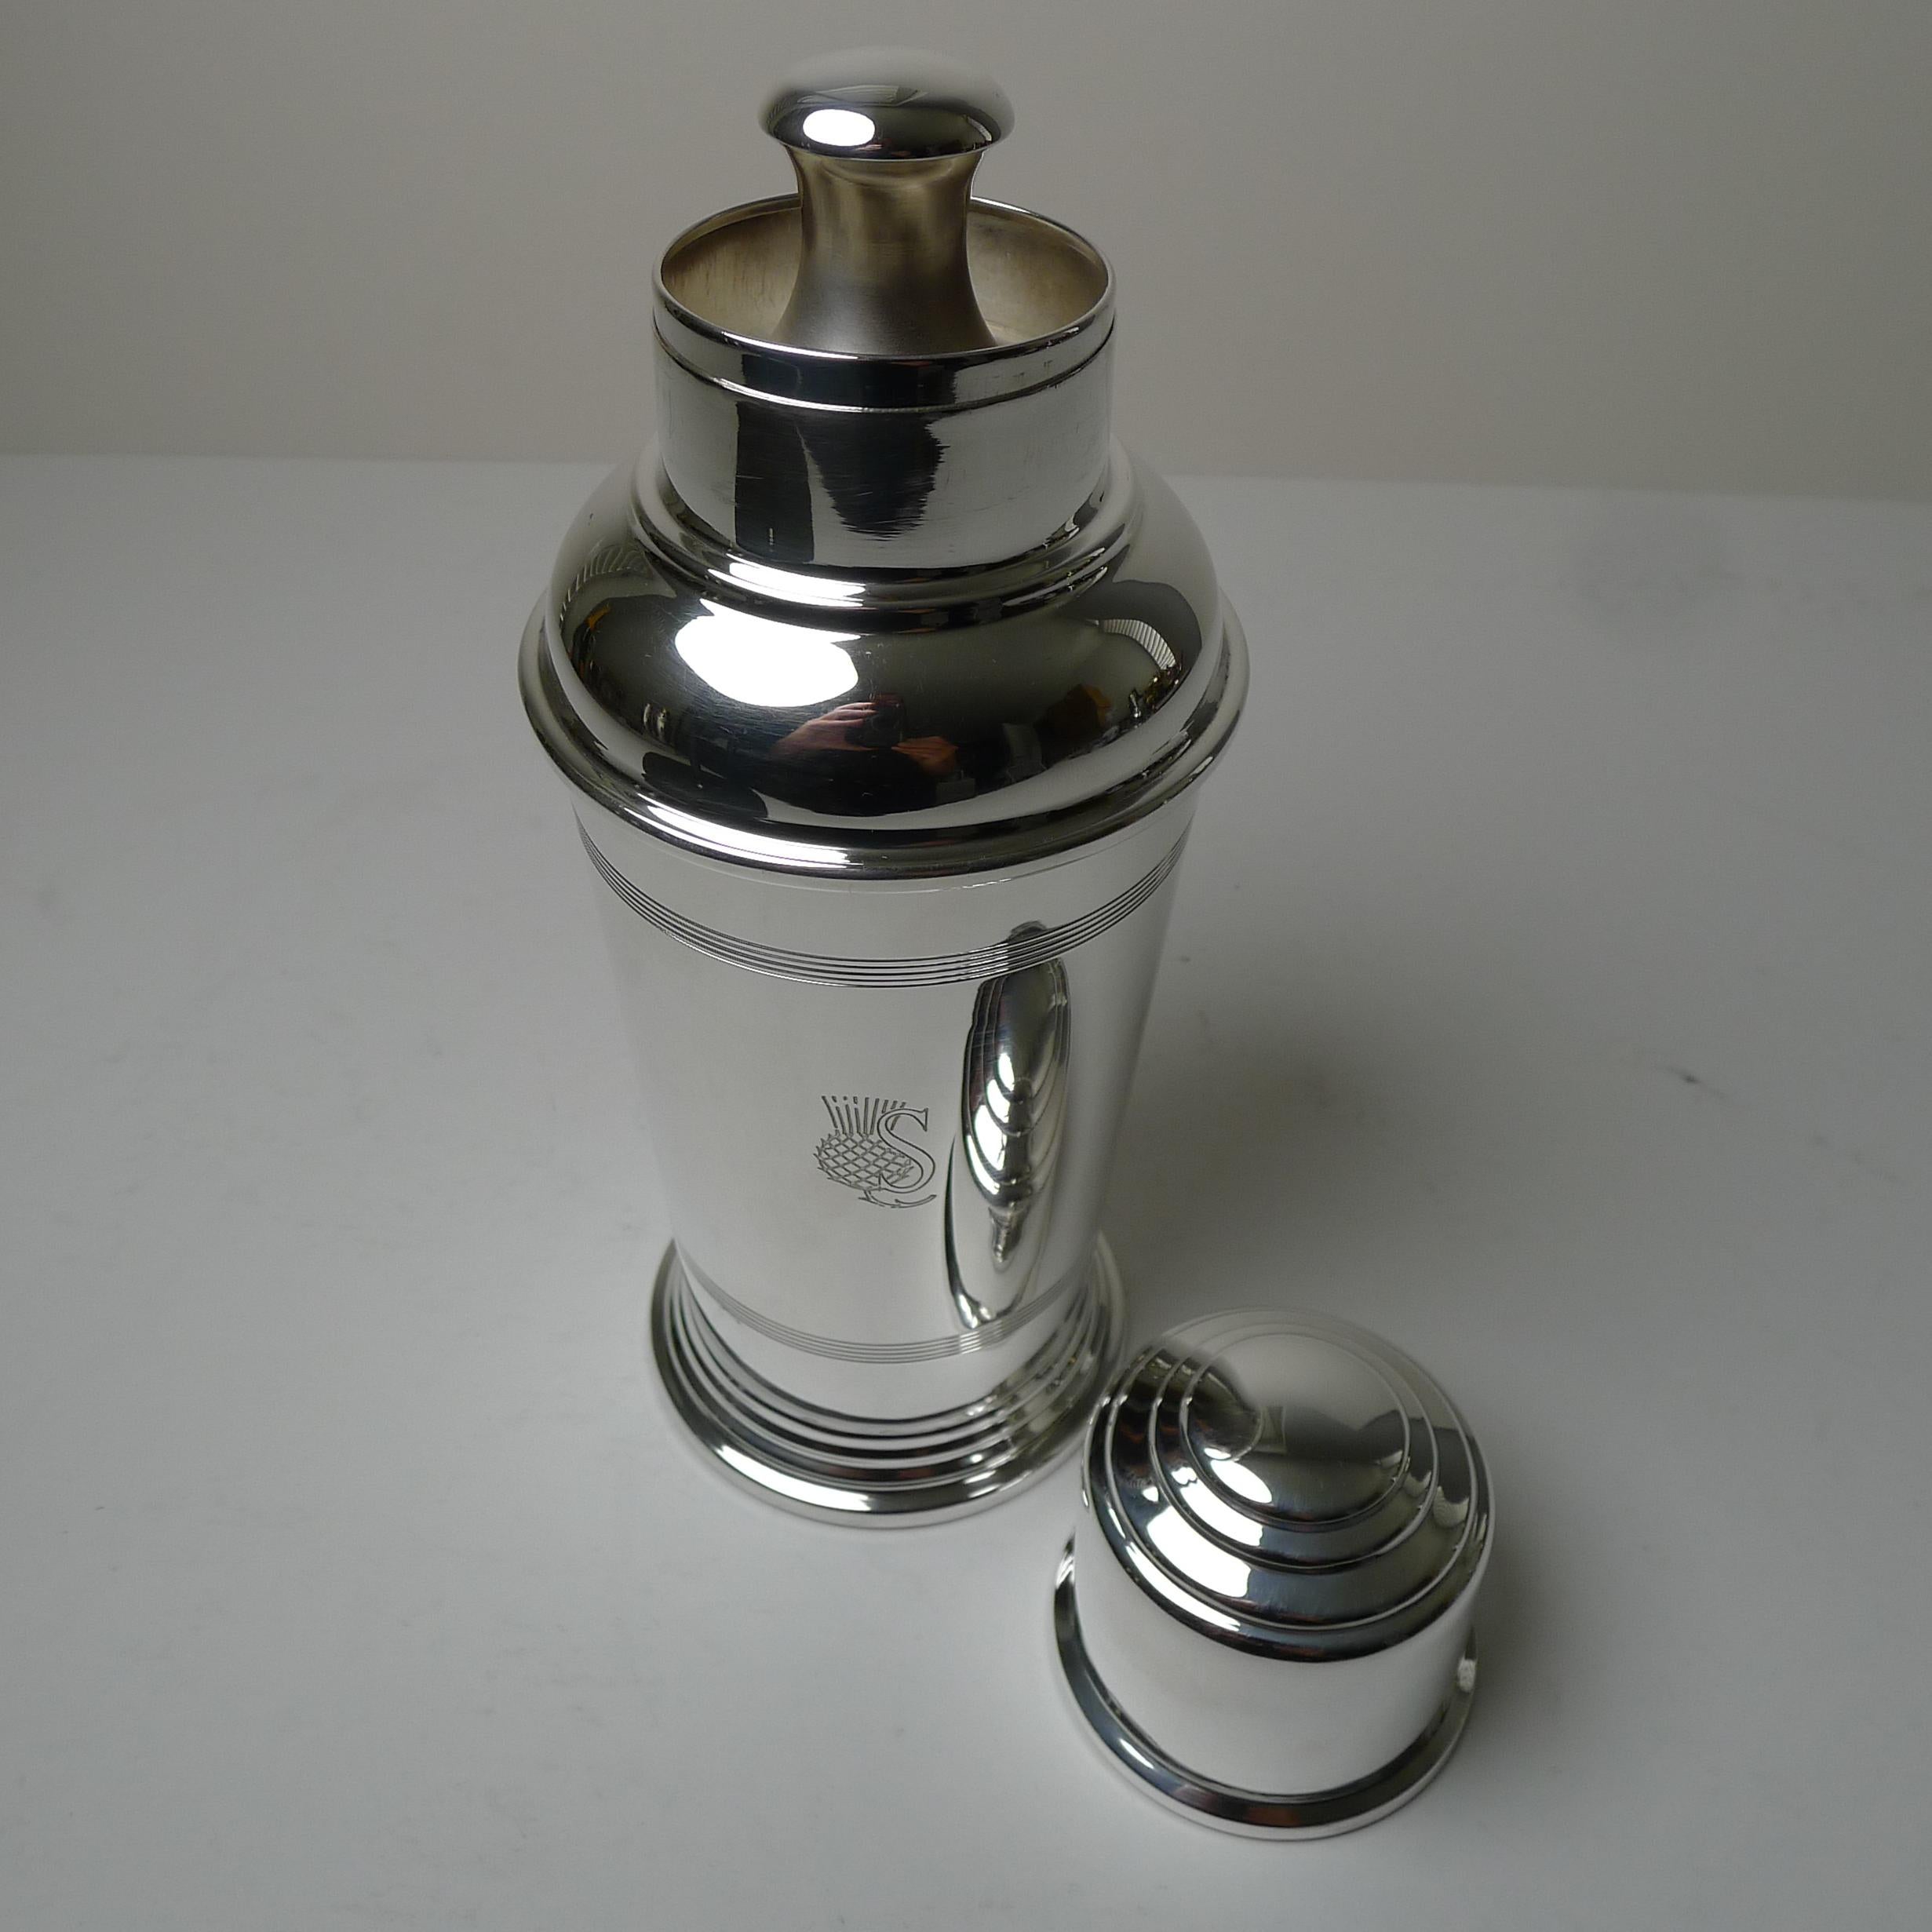 Silver Plate Quality Art Deco Cocktail Shaker by Goldsmith's & Silversmith's Company c.1960's